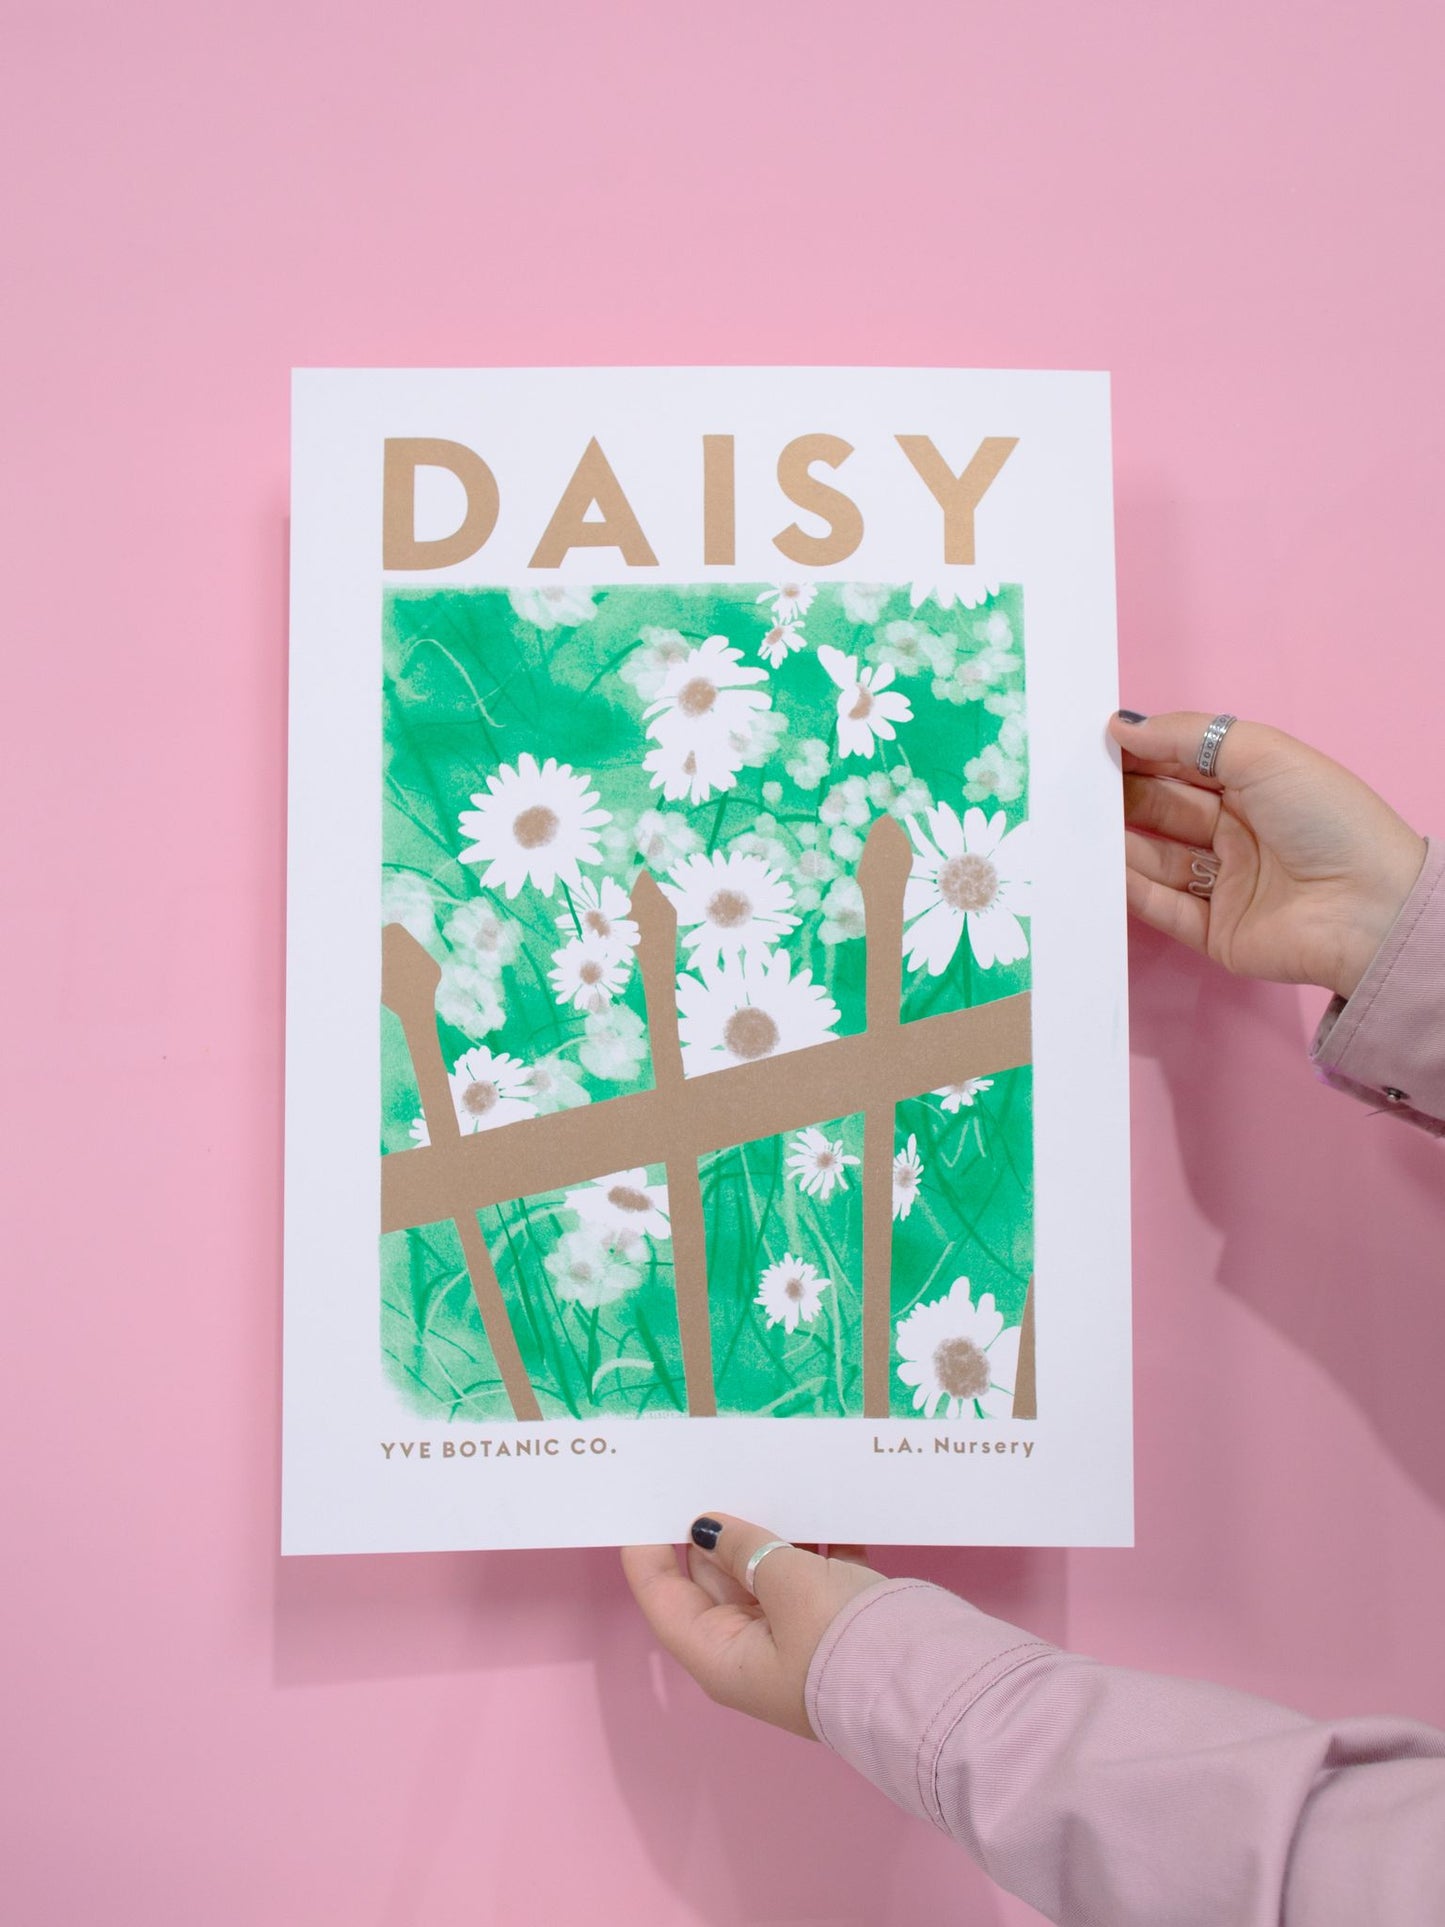 A someone holding a risograph print of a daisy and fence with the word Daisy at the top. Pink background in image.